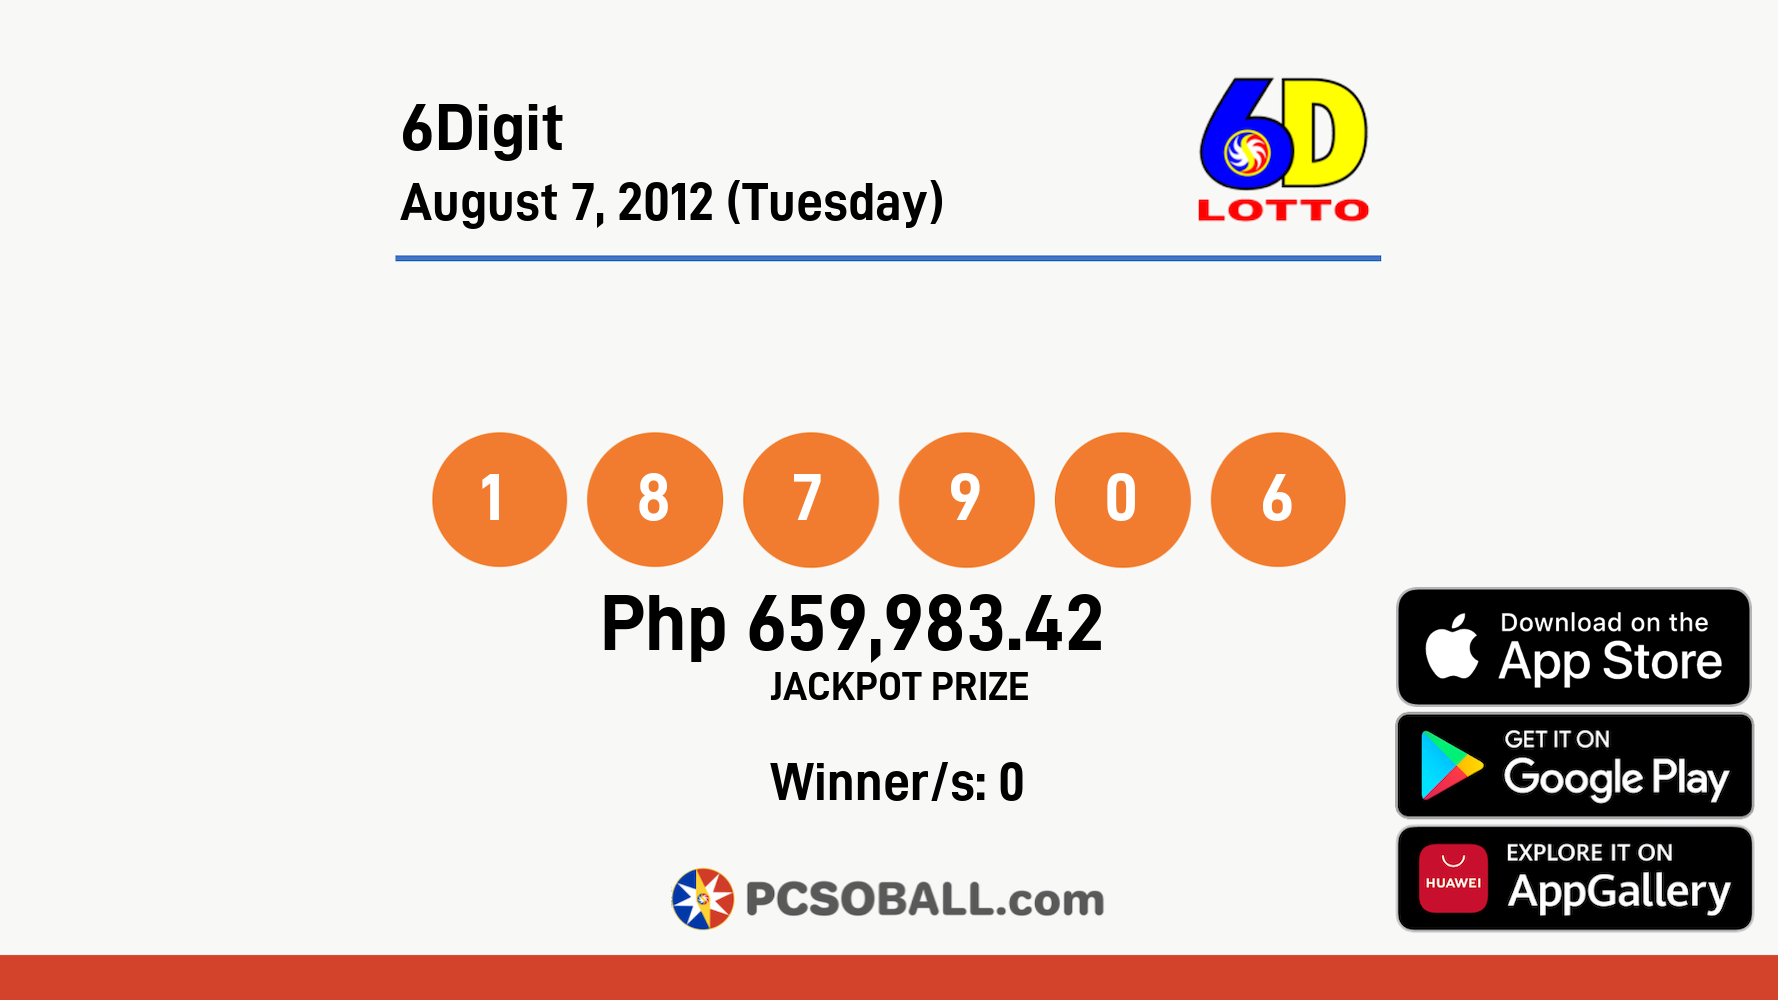 6Digit August 7, 2012 (Tuesday) Result